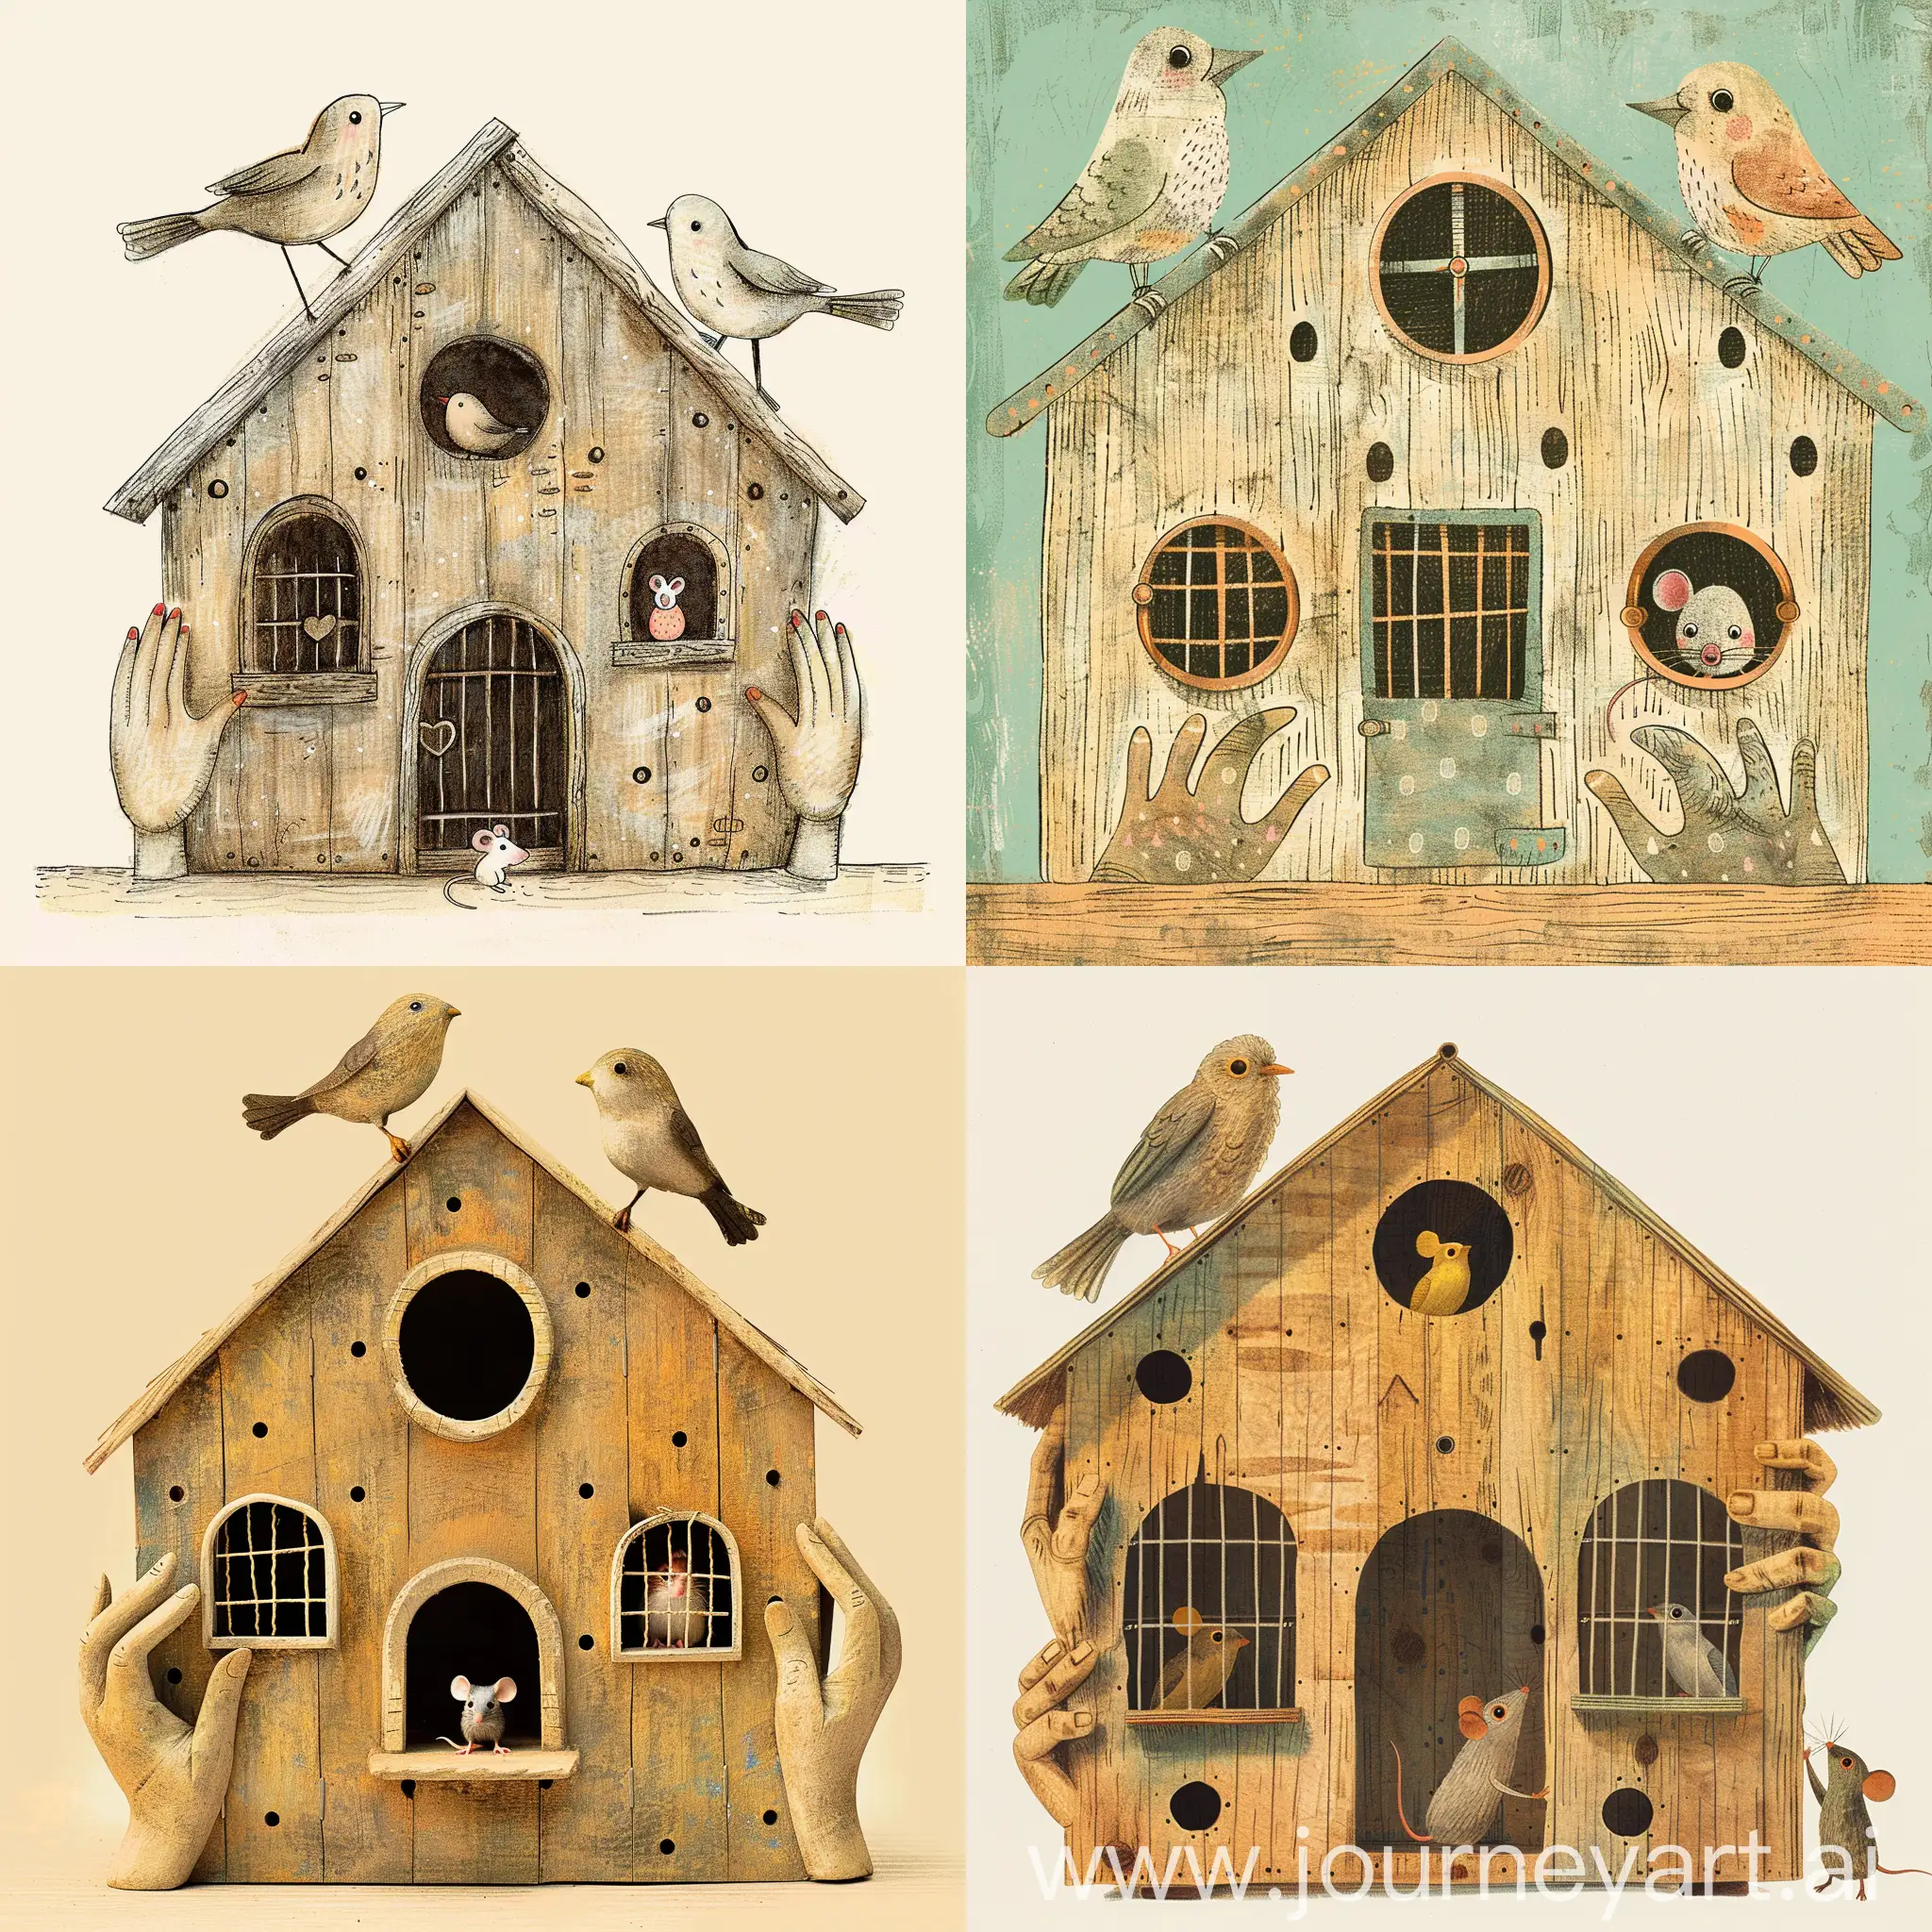 House shaped birdcage made of wood with hands, windows and holes, ２ birds peeking out of the holes, small mouse standing outside (focus), simple image pattern, vintage mouse. Hand drawn, Easter colors, abstract, cheerful, whimsical, funny, children's storybook style